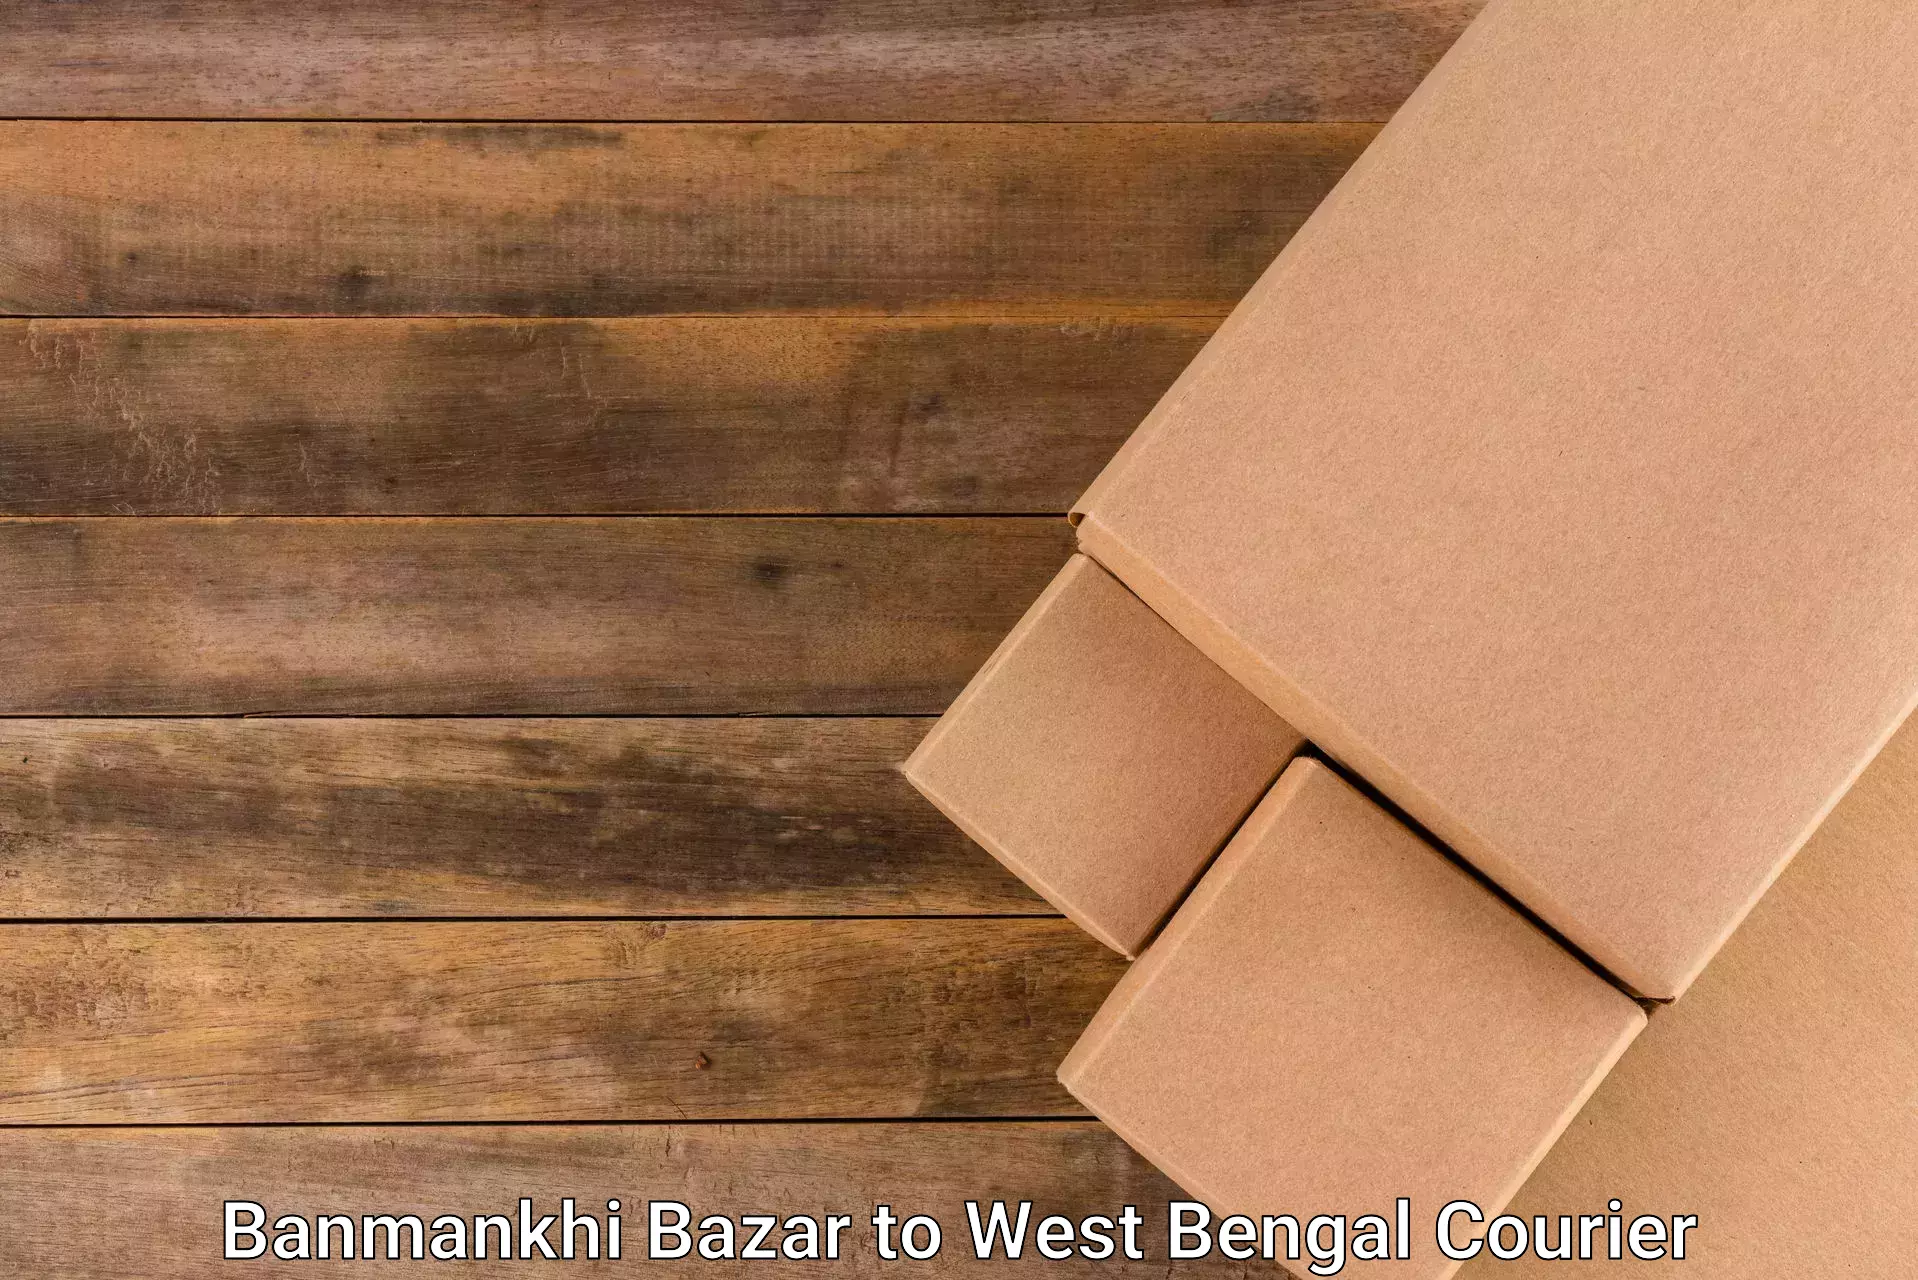 Comprehensive shipping network Banmankhi Bazar to West Bengal